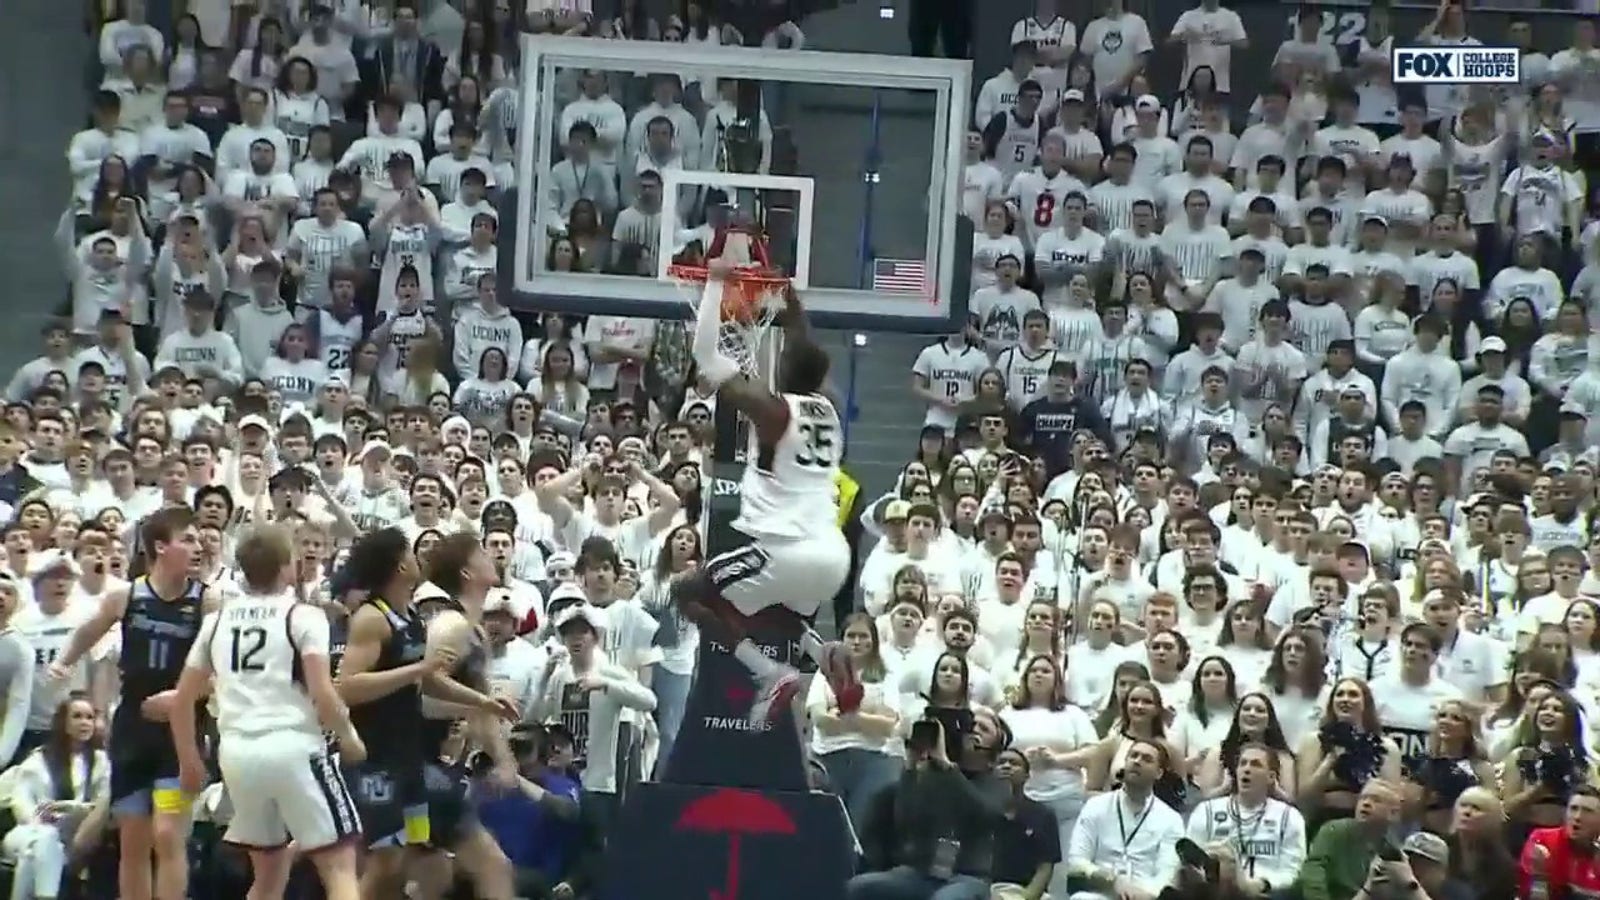 UConn's Samson Johnson HAMMERS a two-handed alley-oop jam against Marquette